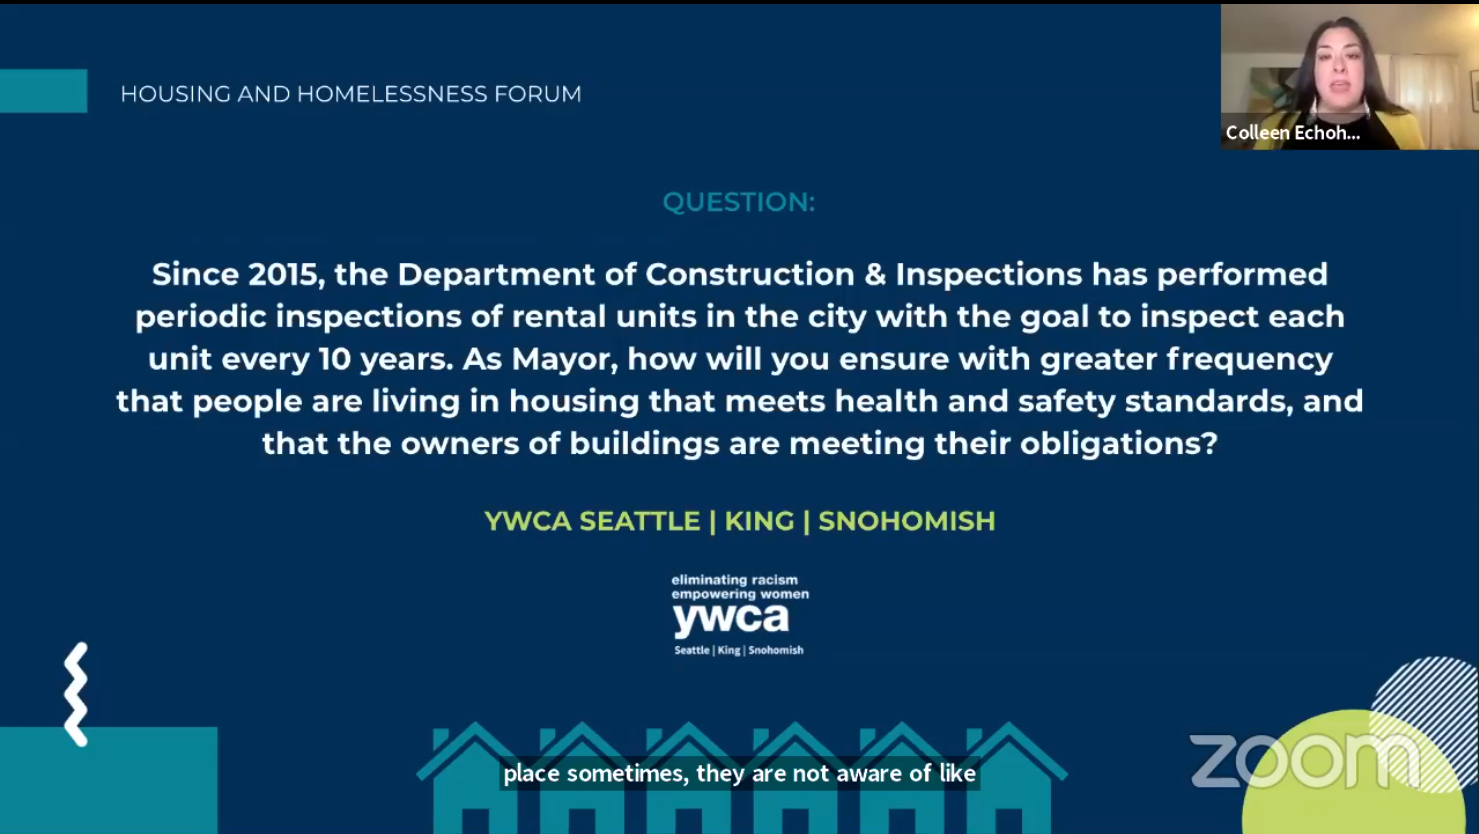 The YWCA's question is shown on Zoom